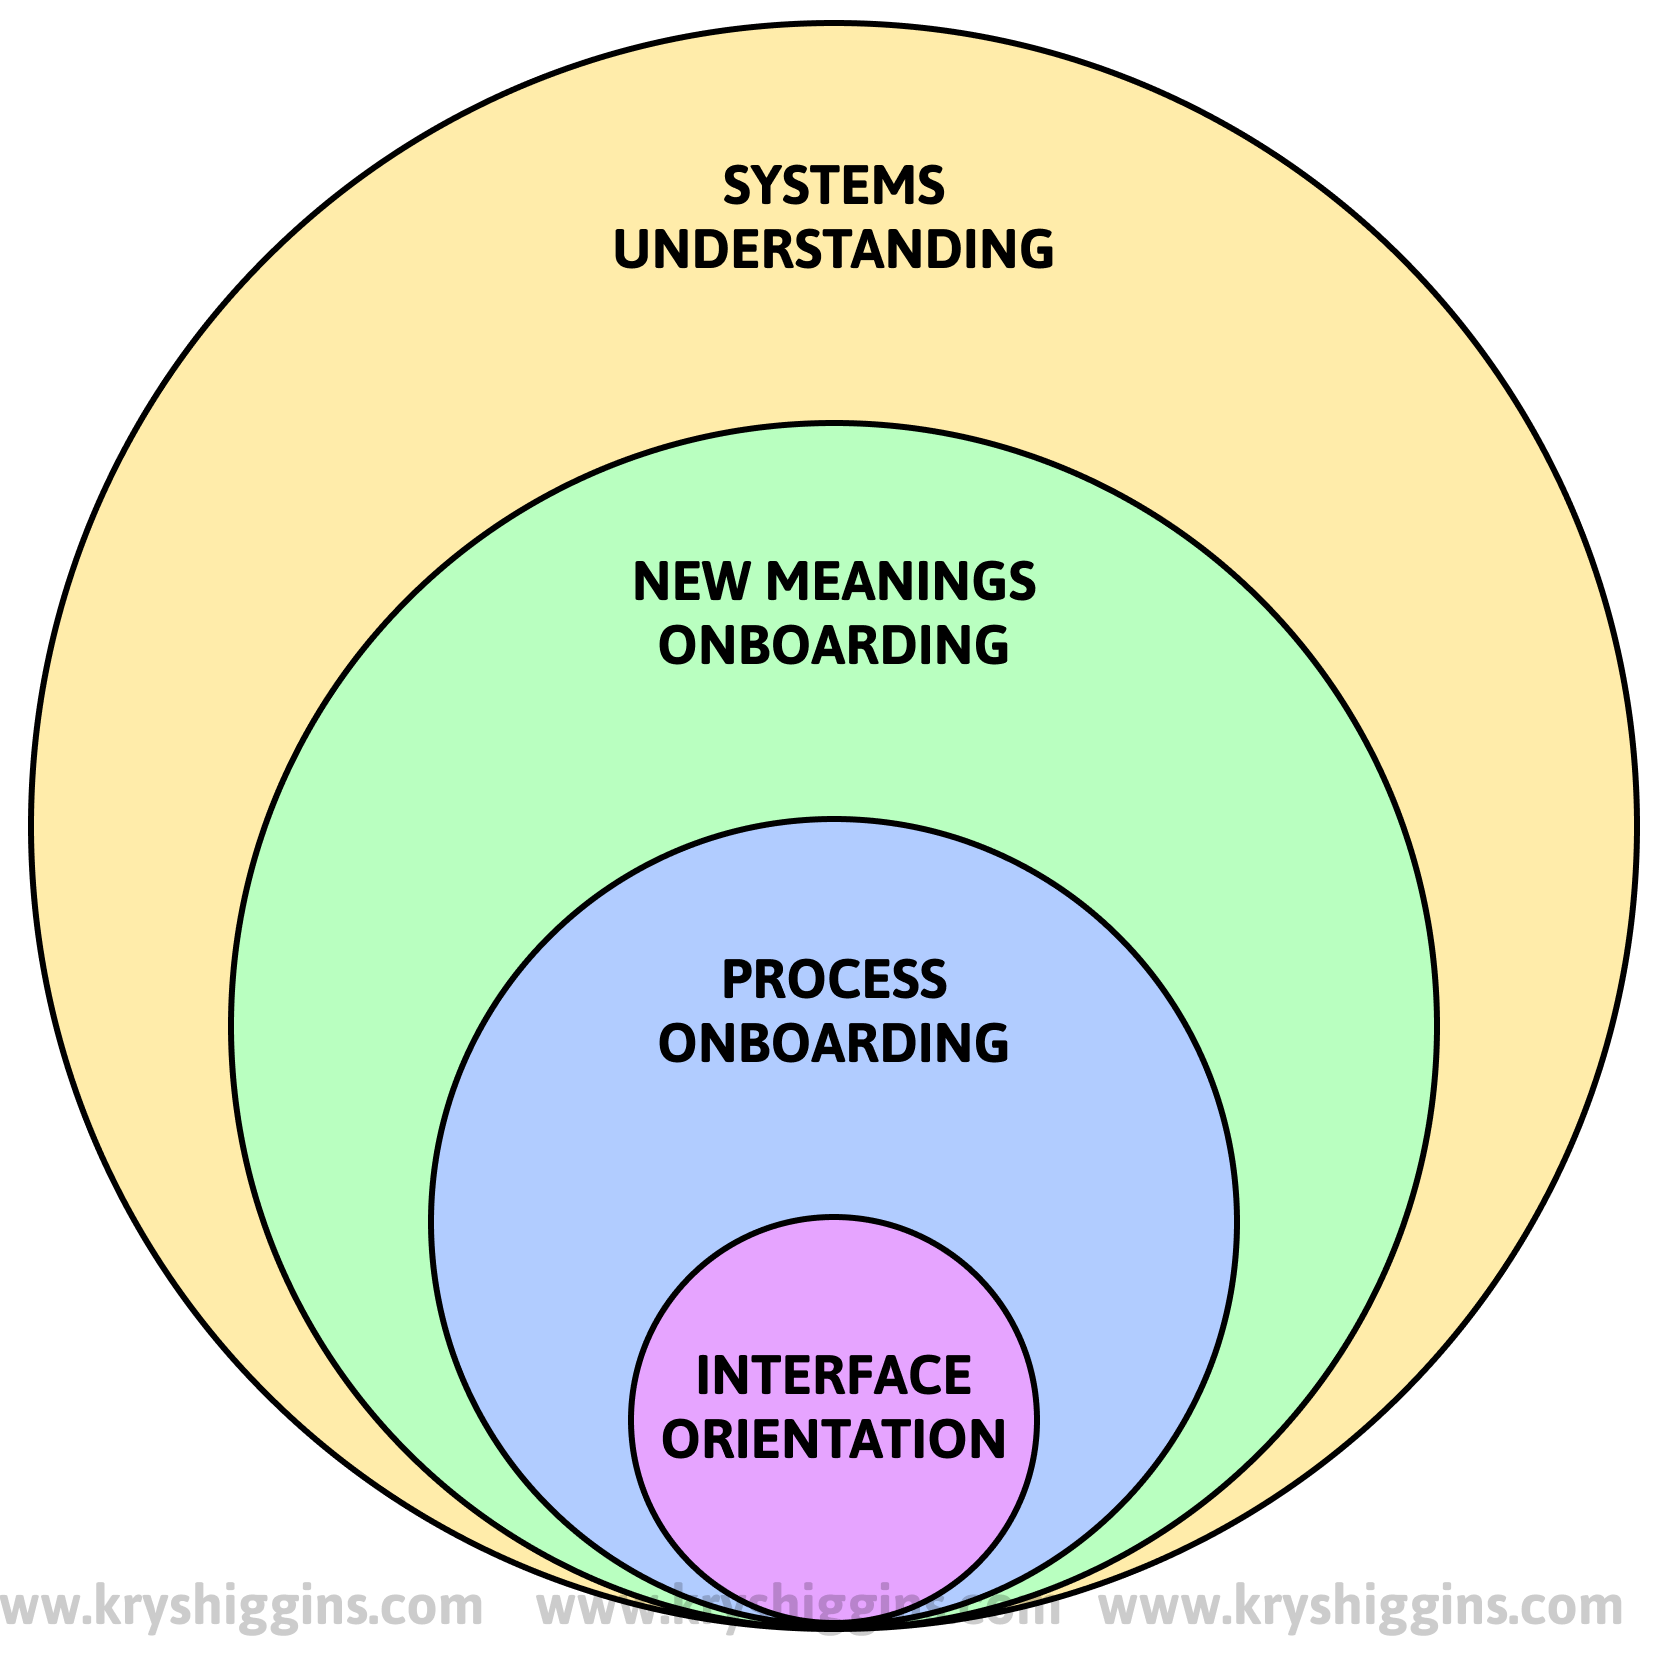 Illustration of 4 levels of onboarding represented as 4 concentric circles, with interface orientation being the smallest circle and systems understanding being the largest, outer circle.